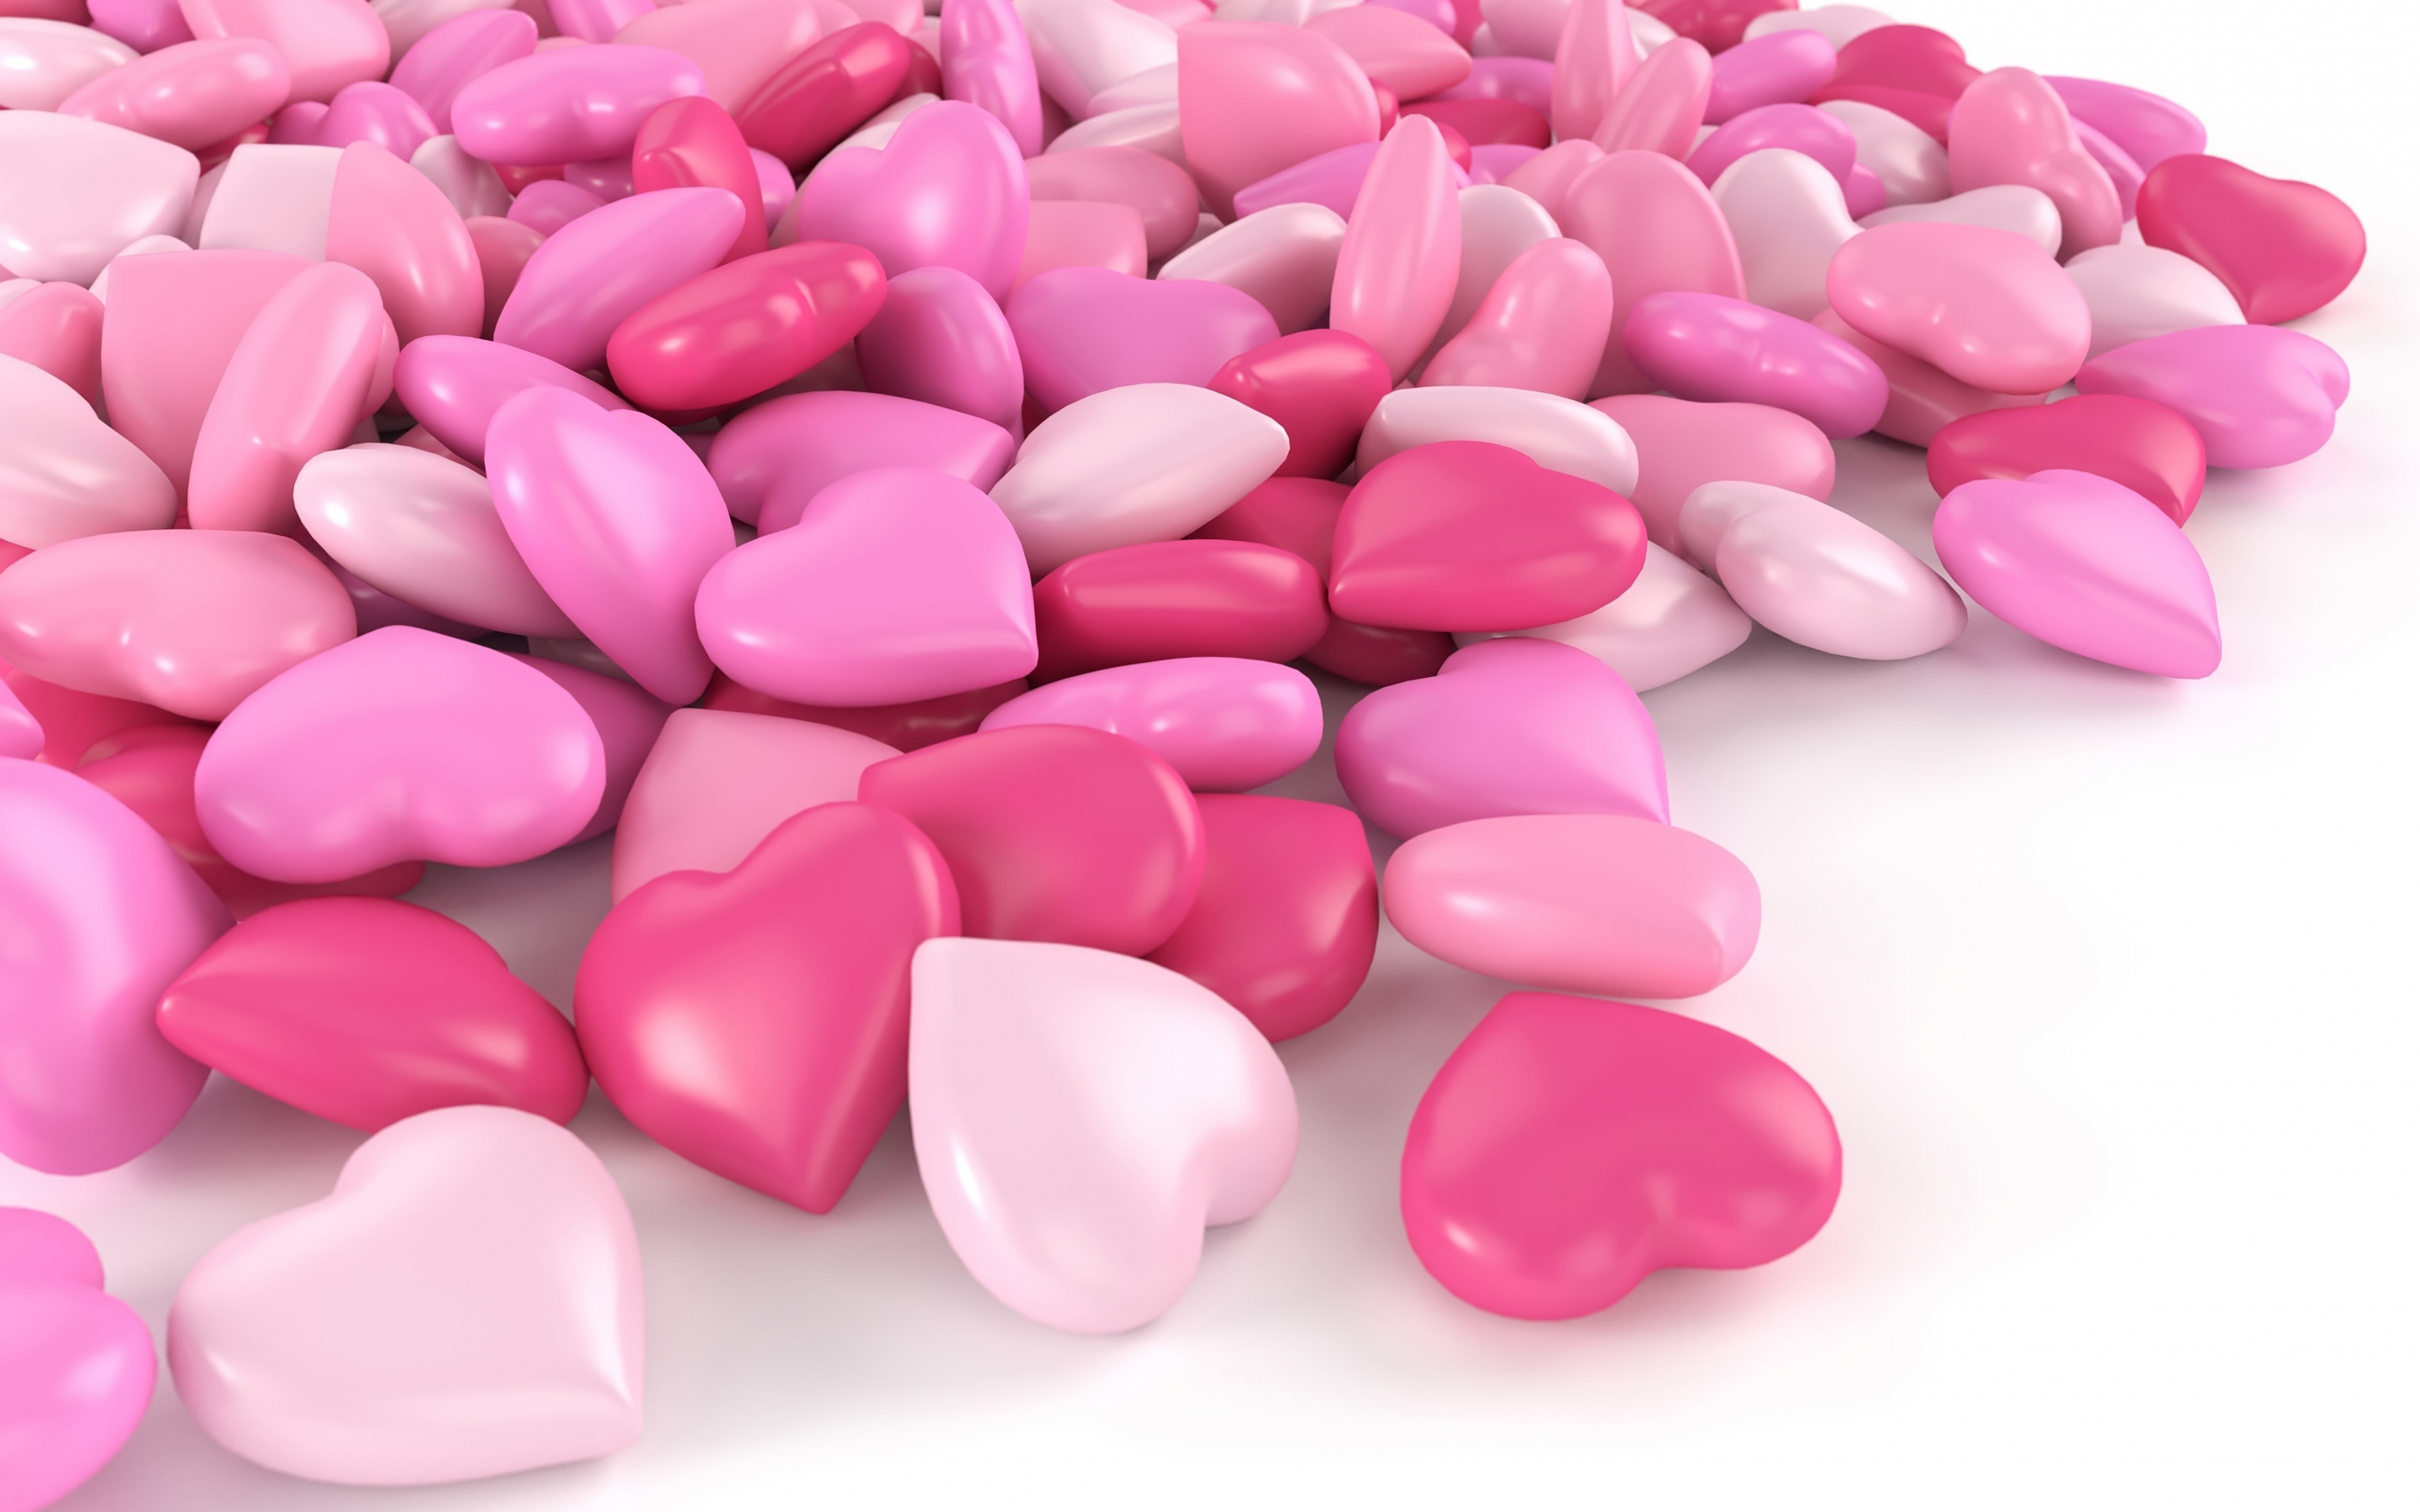 Hearts, sweets, candy, 2880x1800 wallpaper